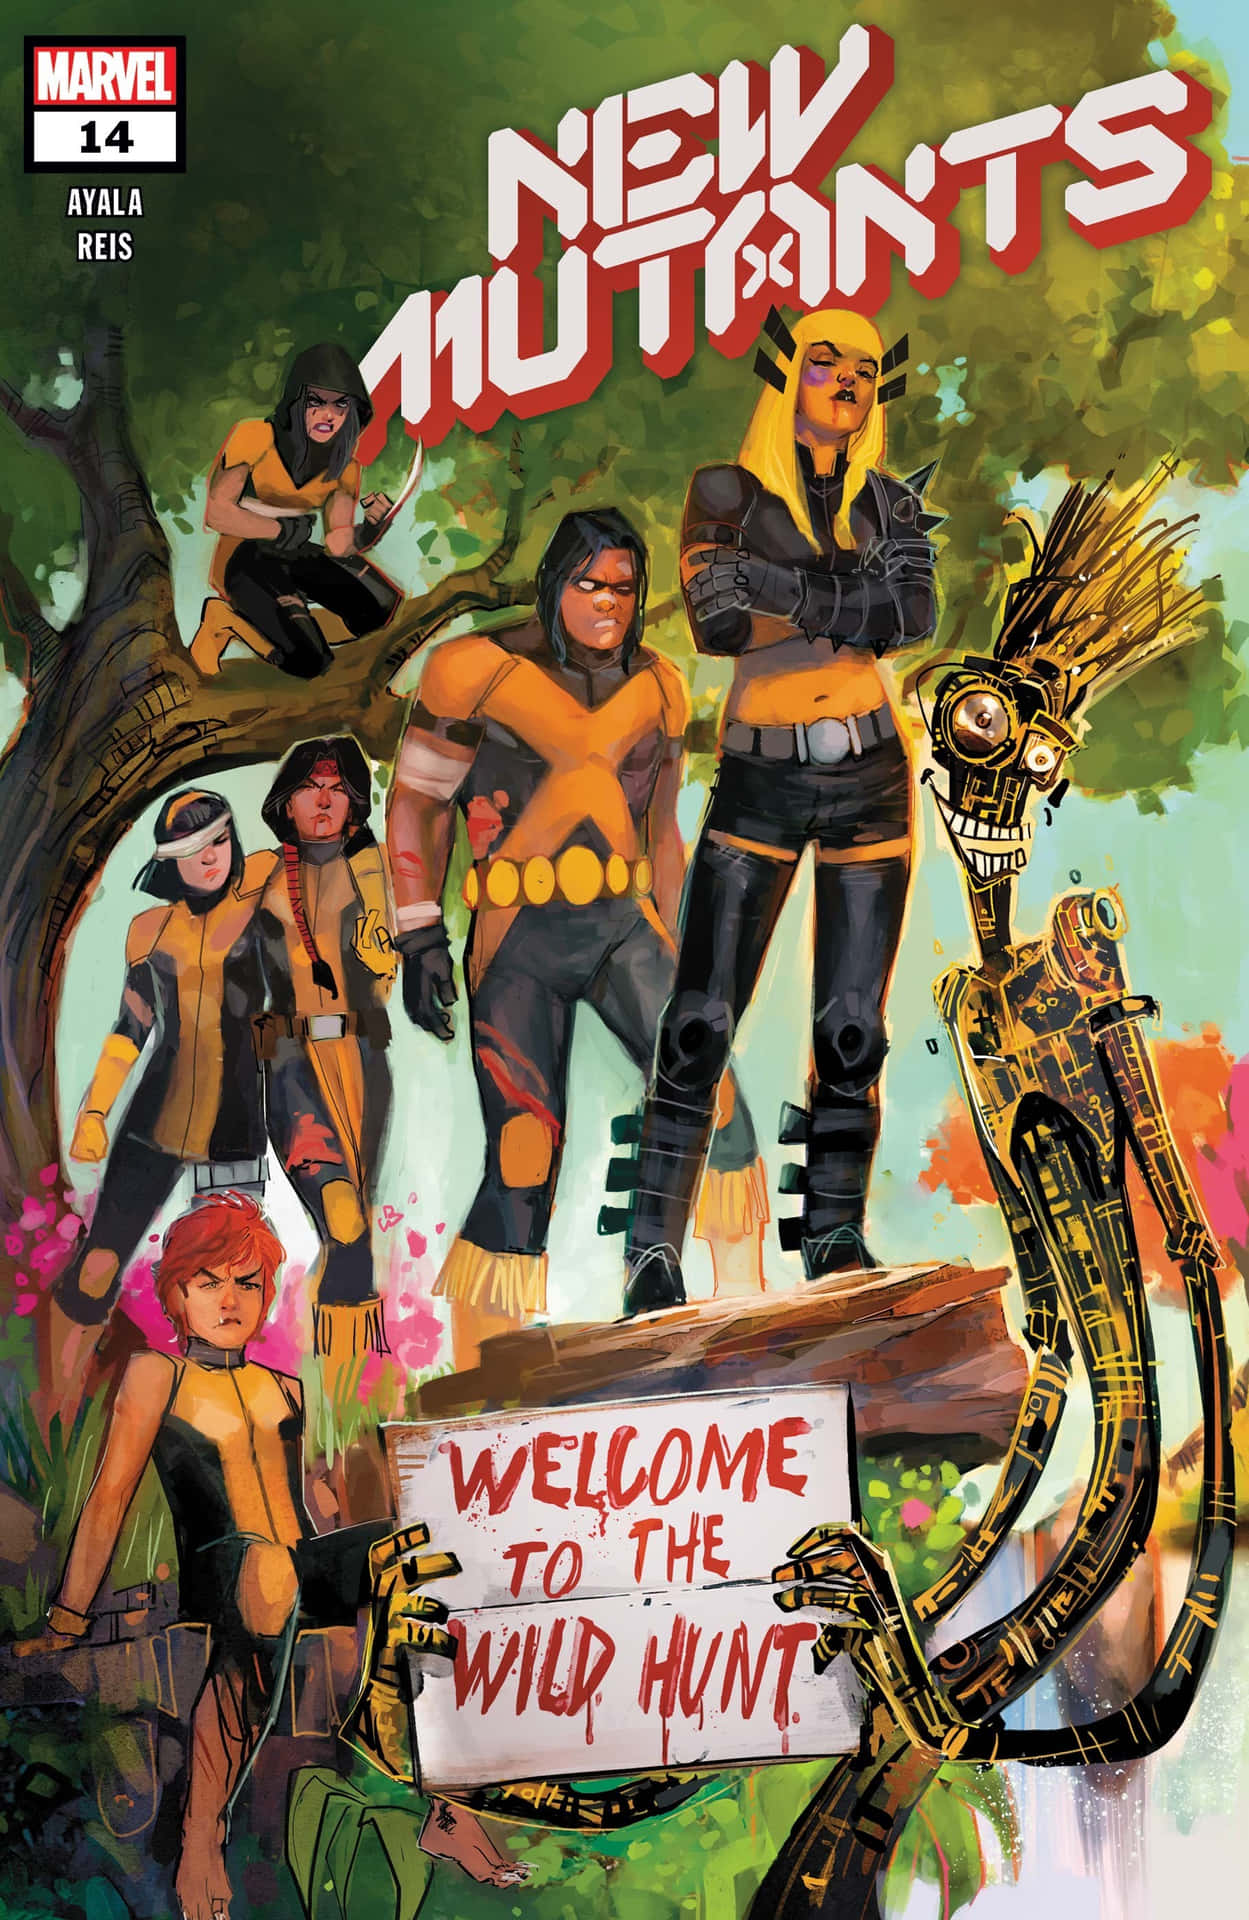 New Mutants Poster Featuring the Team of Marvel Superheroes Wallpaper